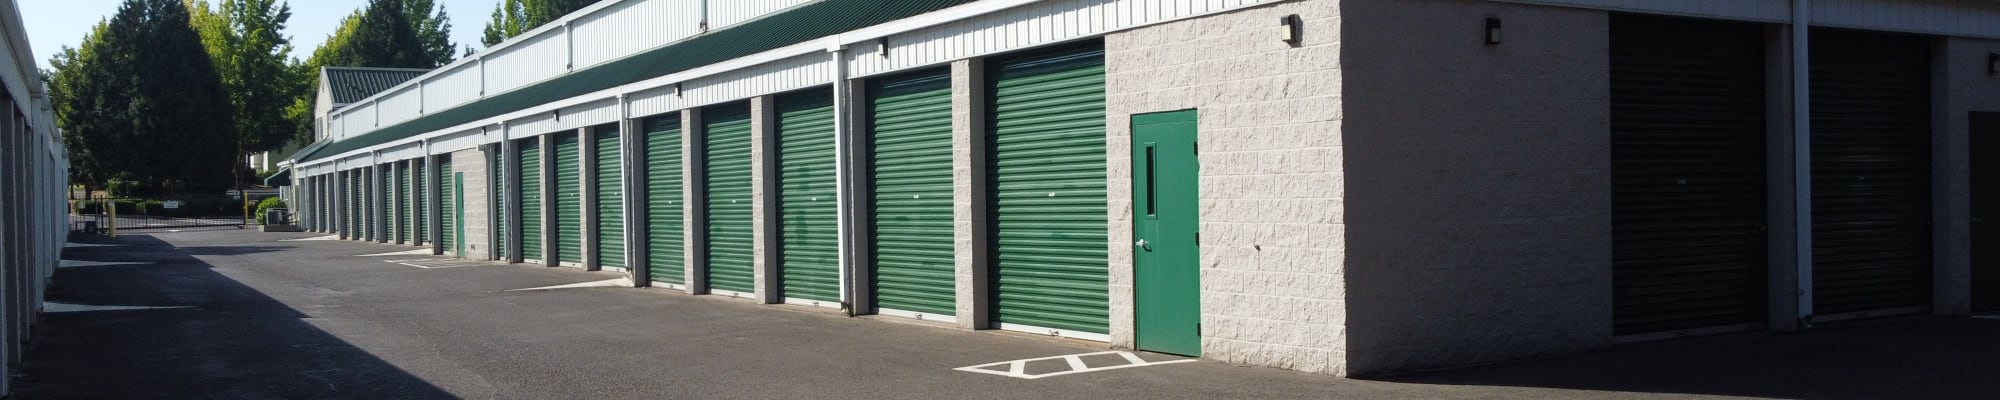 Office and access hours at A Storage Place in Chino, California